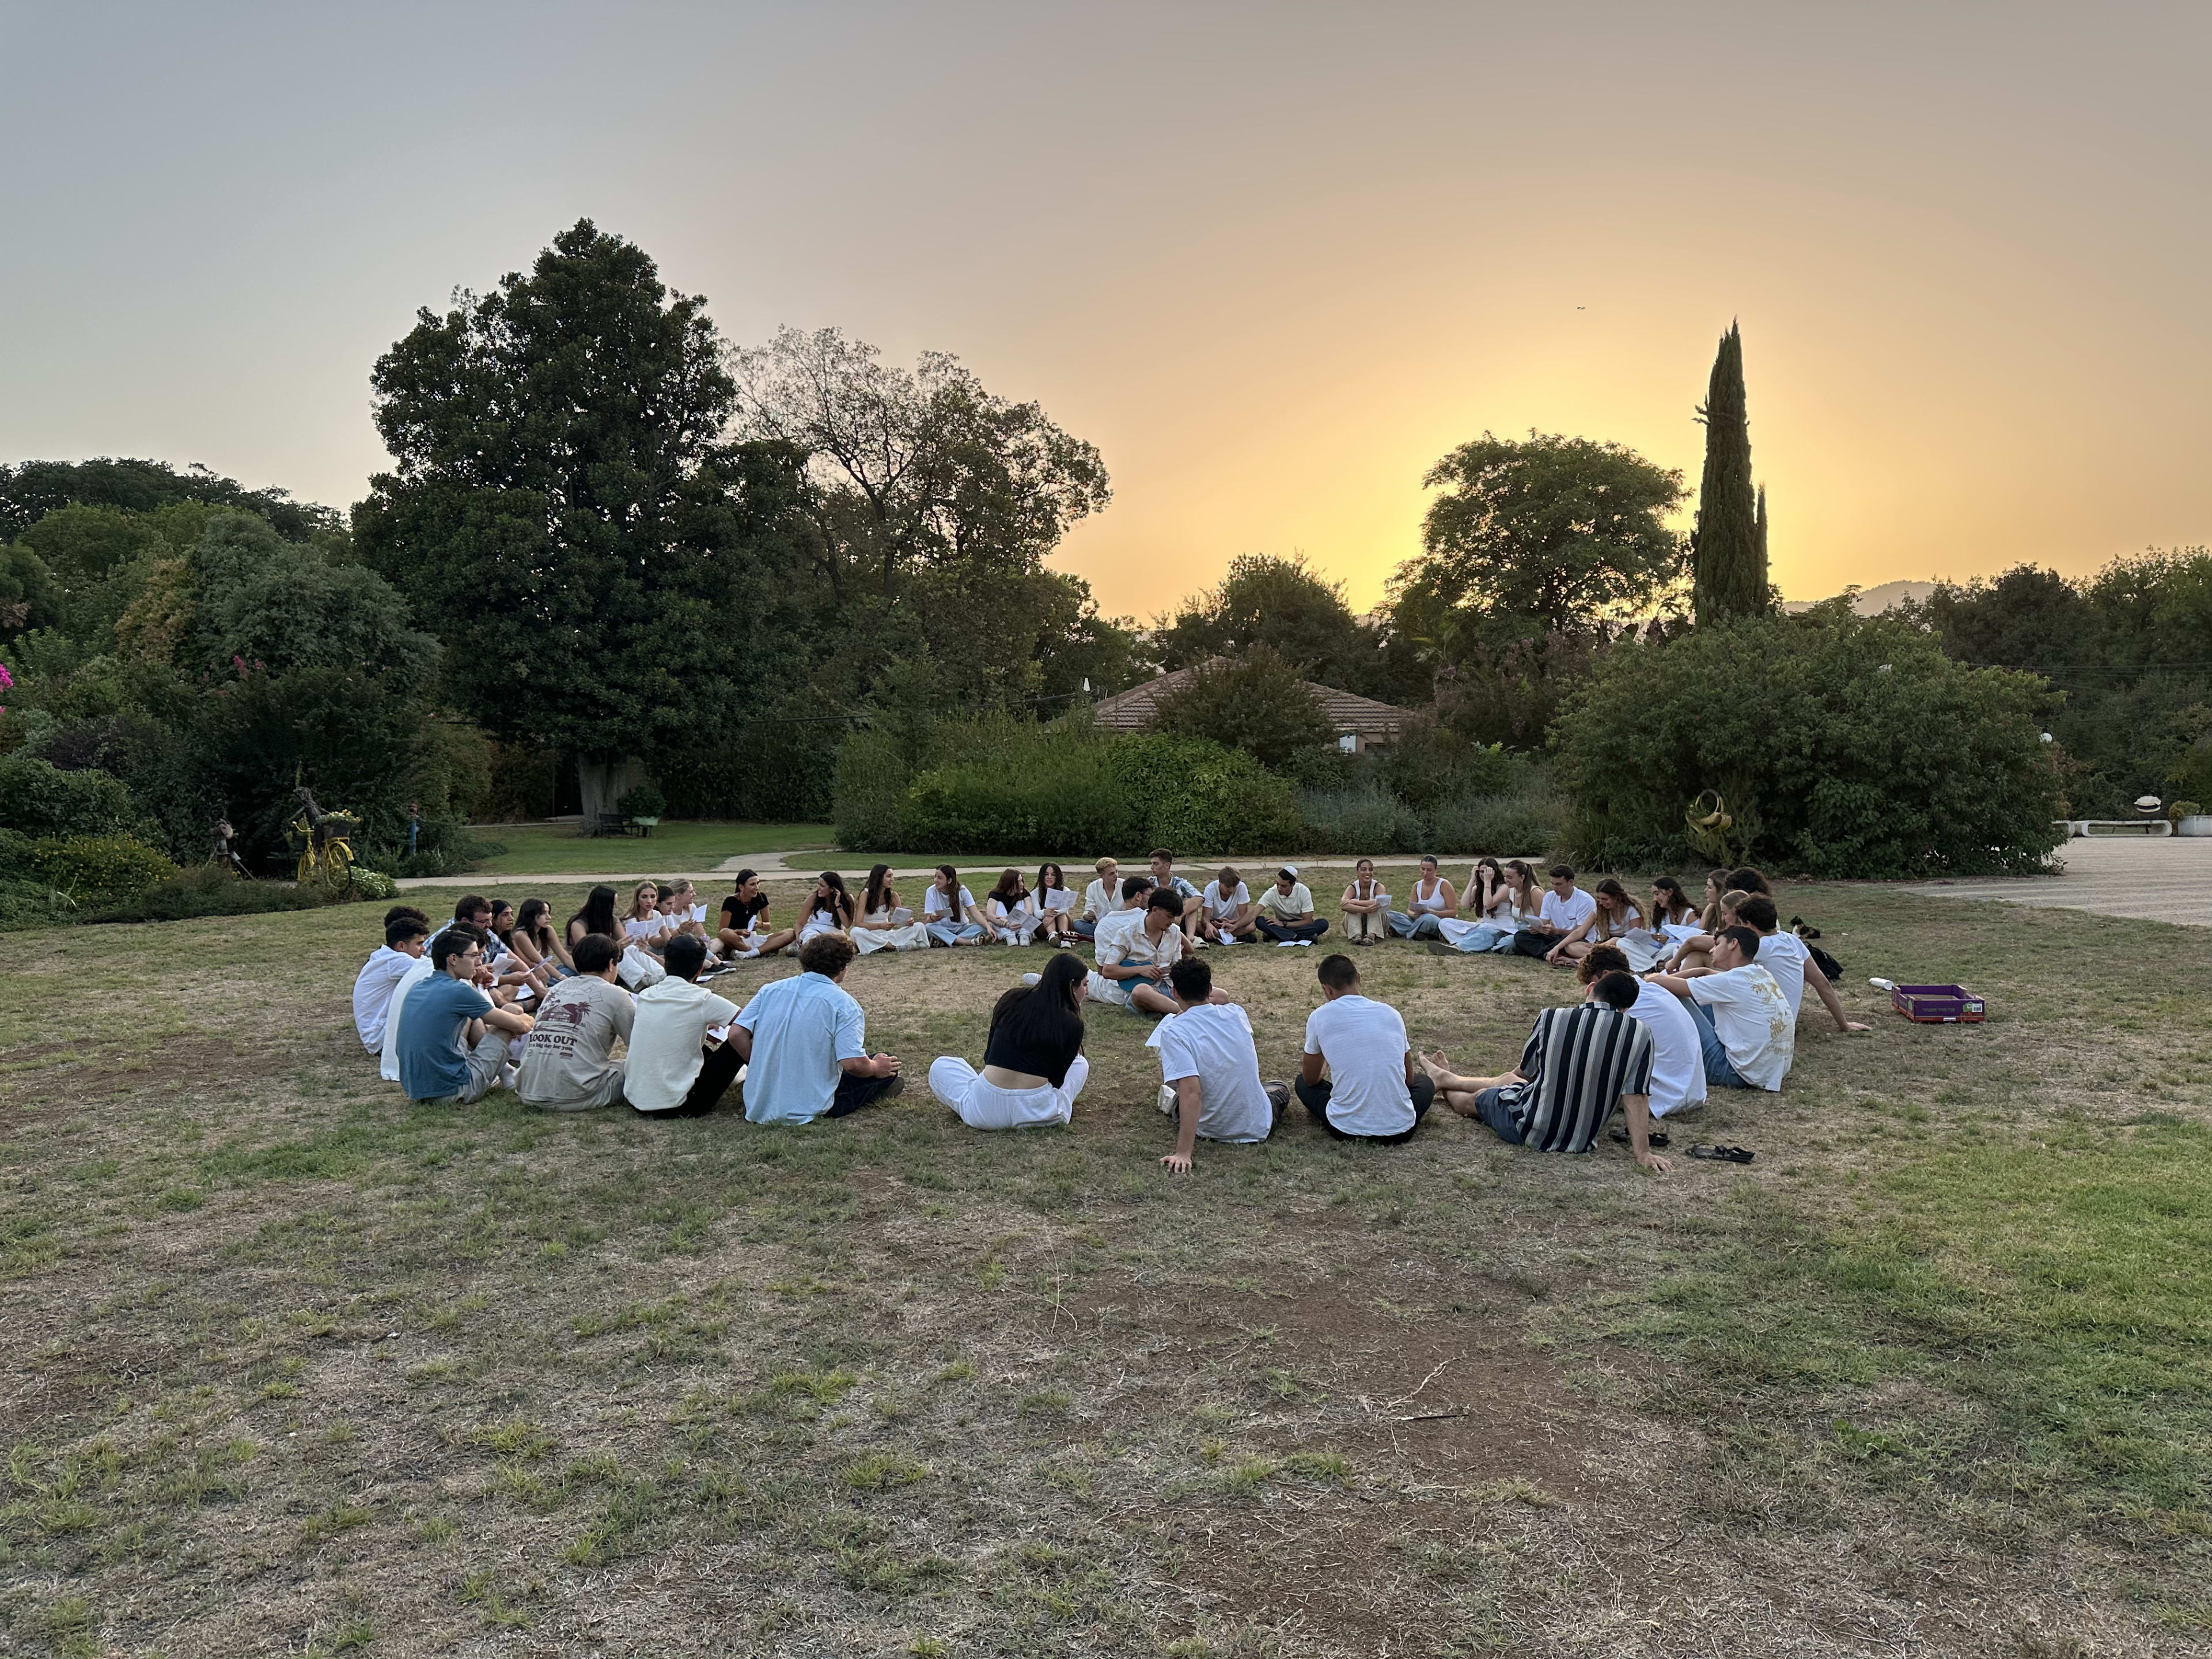 Participants sitting in a circle on grass in the sunset dressed in white for shabbat.